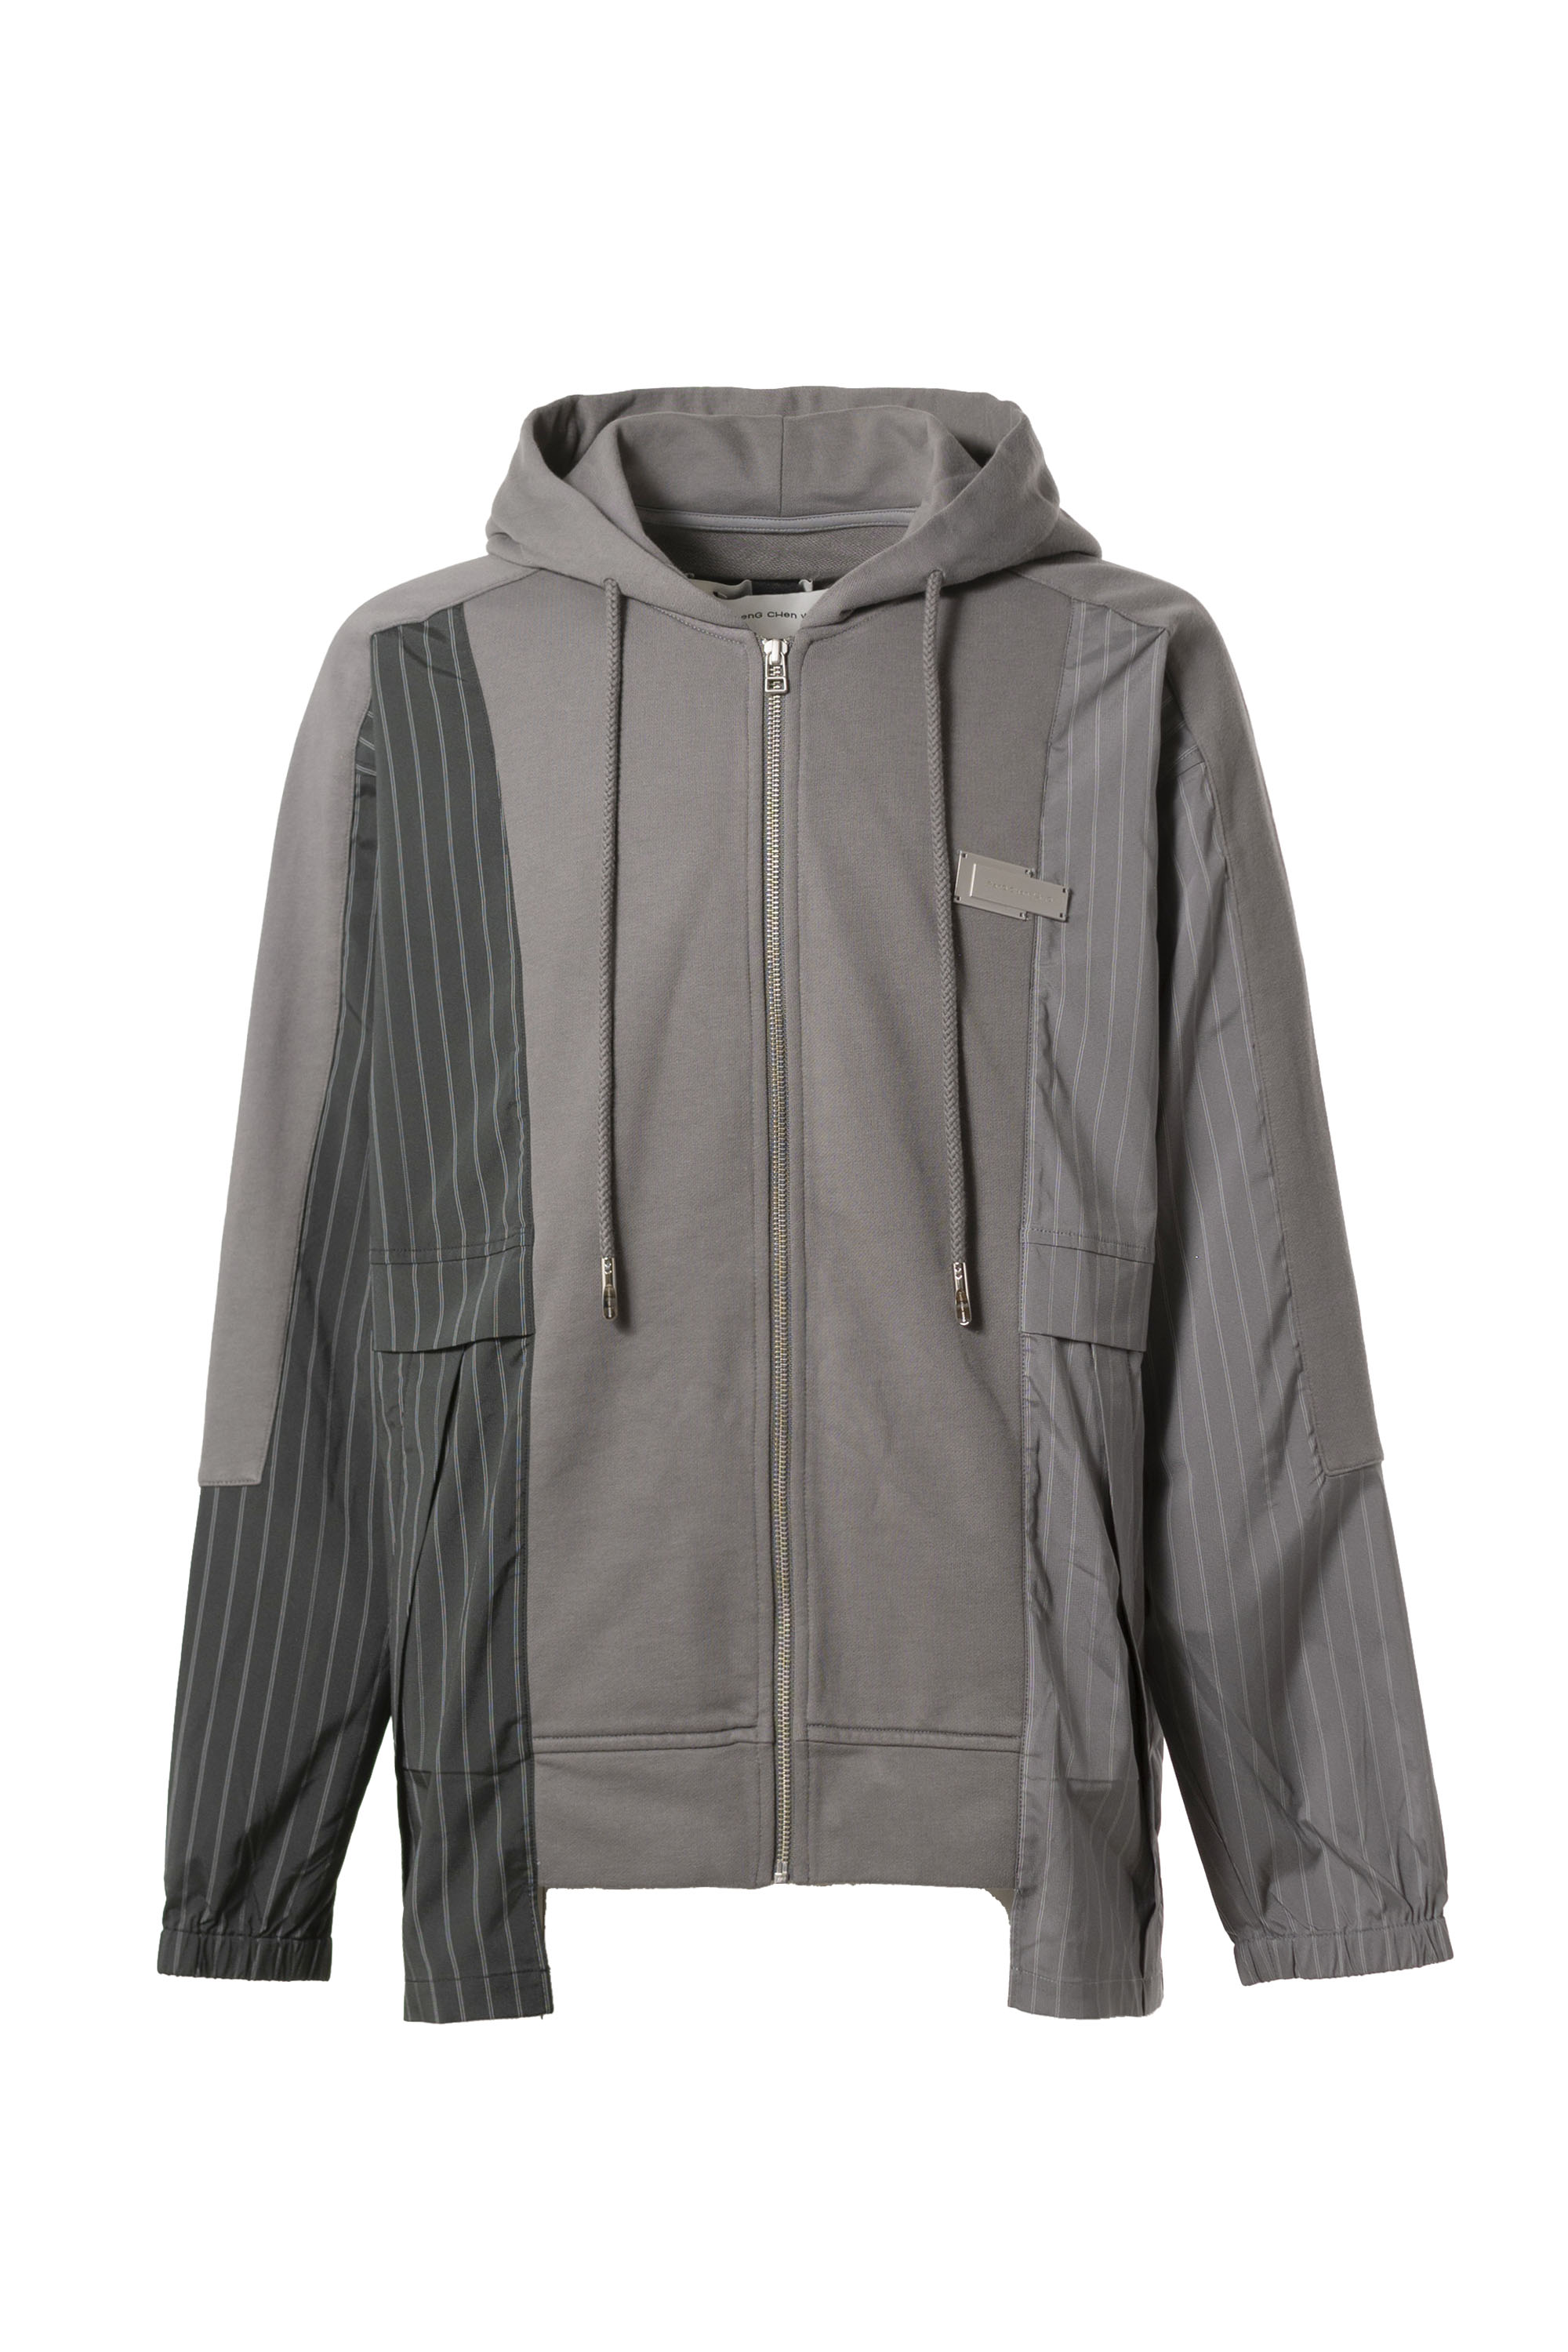 FenG CHen WANG フェンチェンワン SS23 PANELLED ZIP-UP HOODIE / GRY